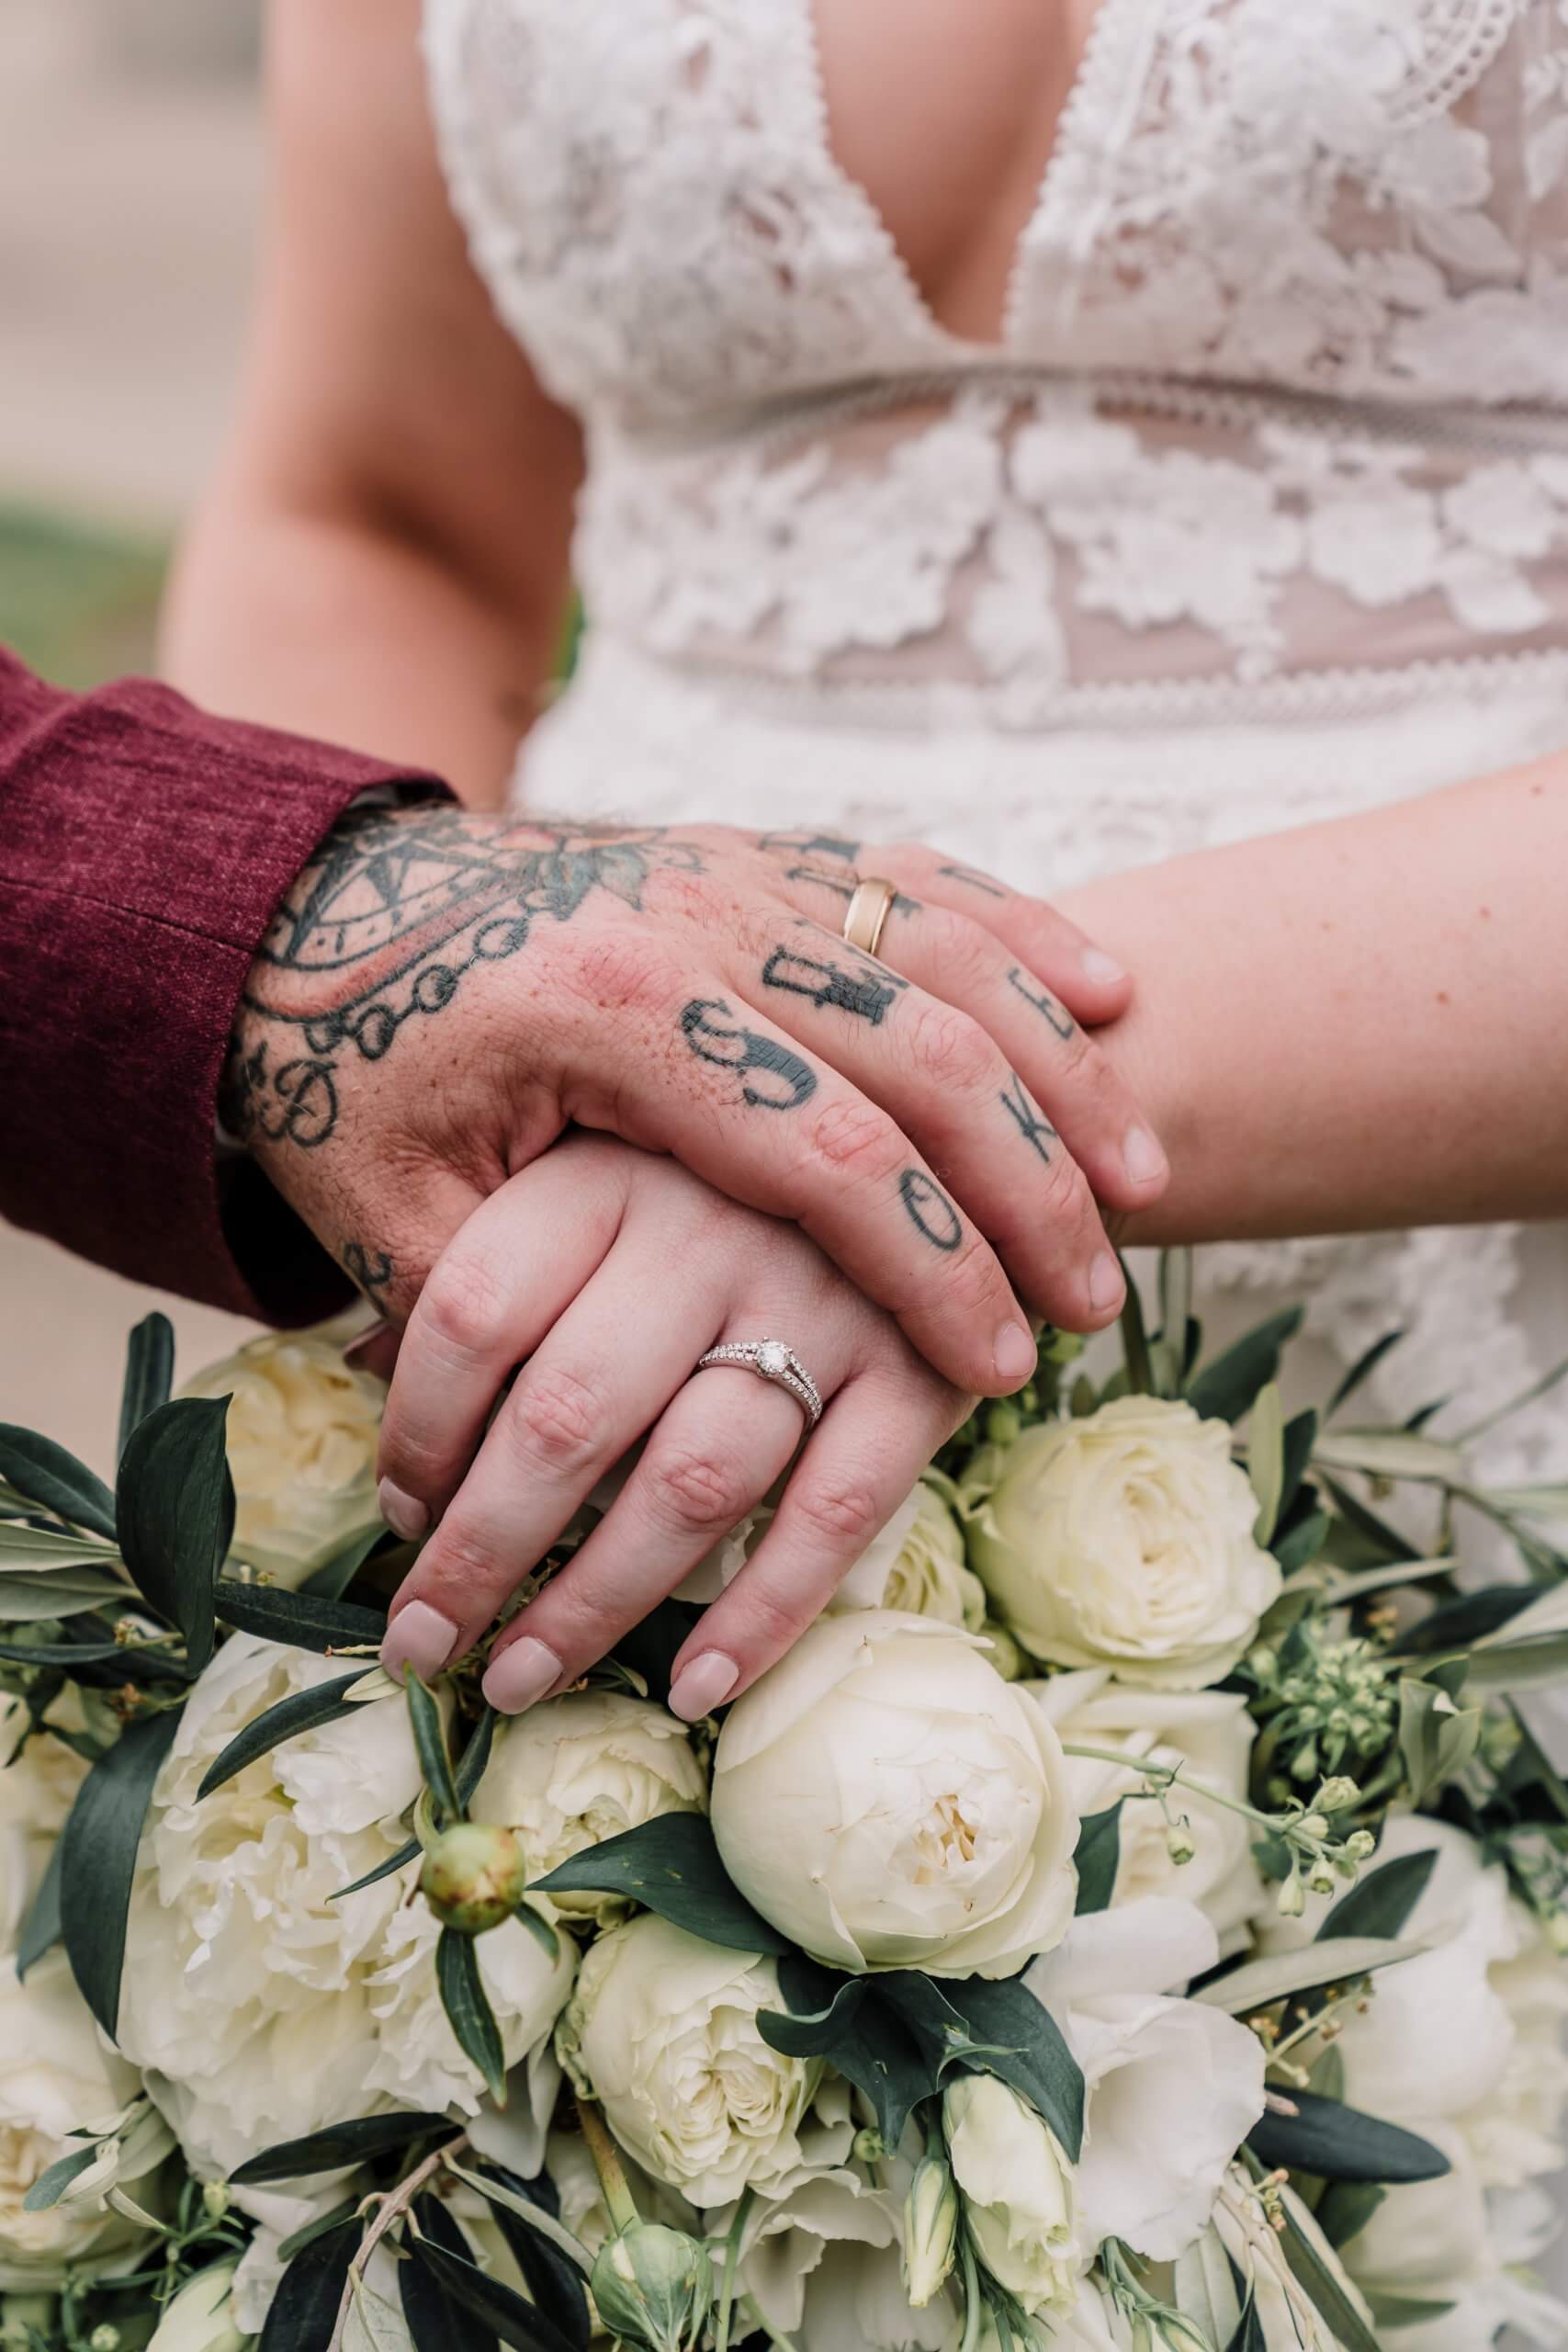 Narrative Portraiture - The groom holding the bride's hand and showing their rings